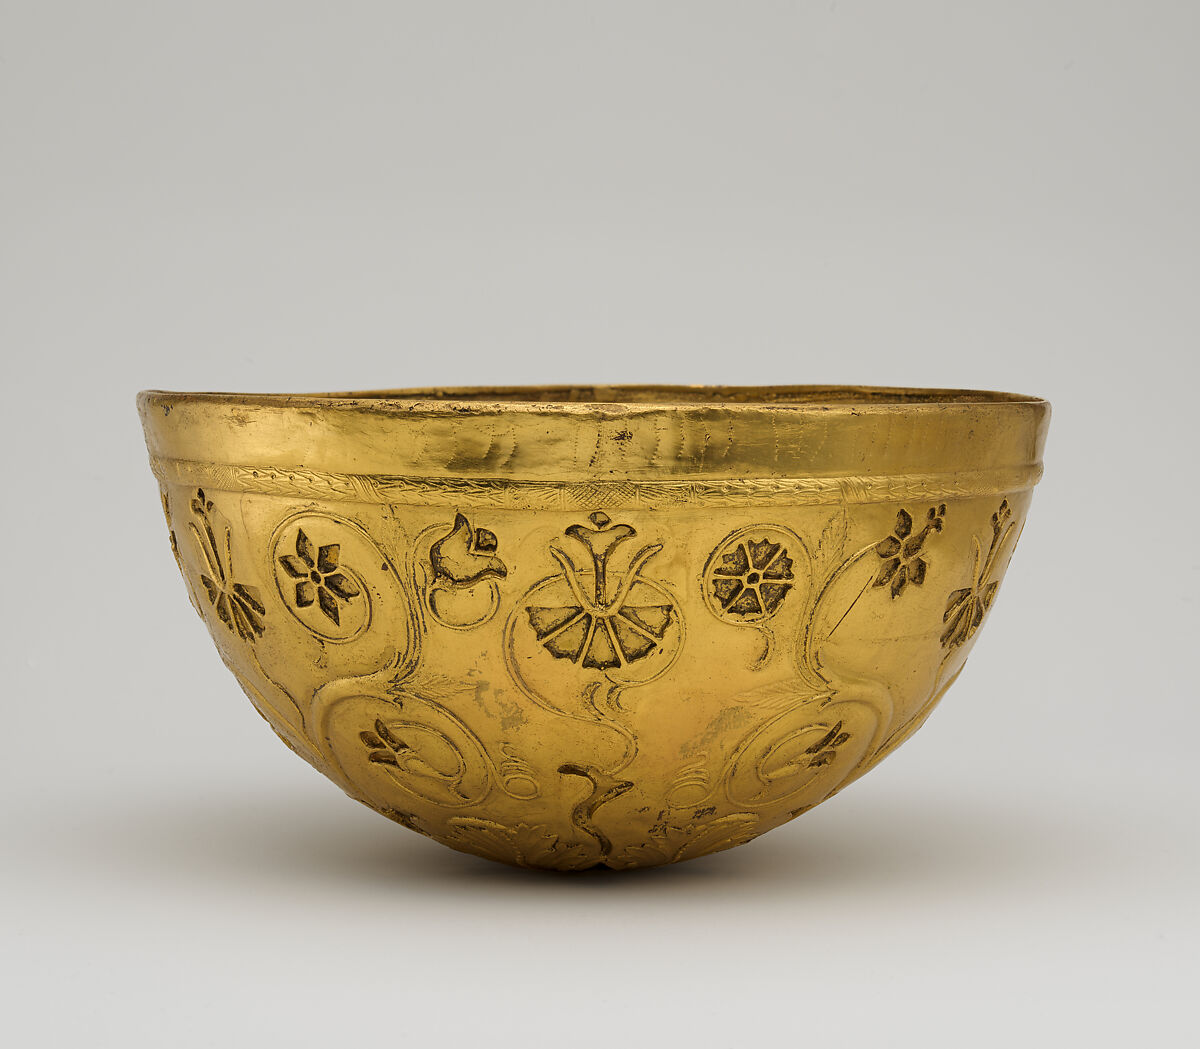 Reproduction of a Scythian bowl, Electrotype 